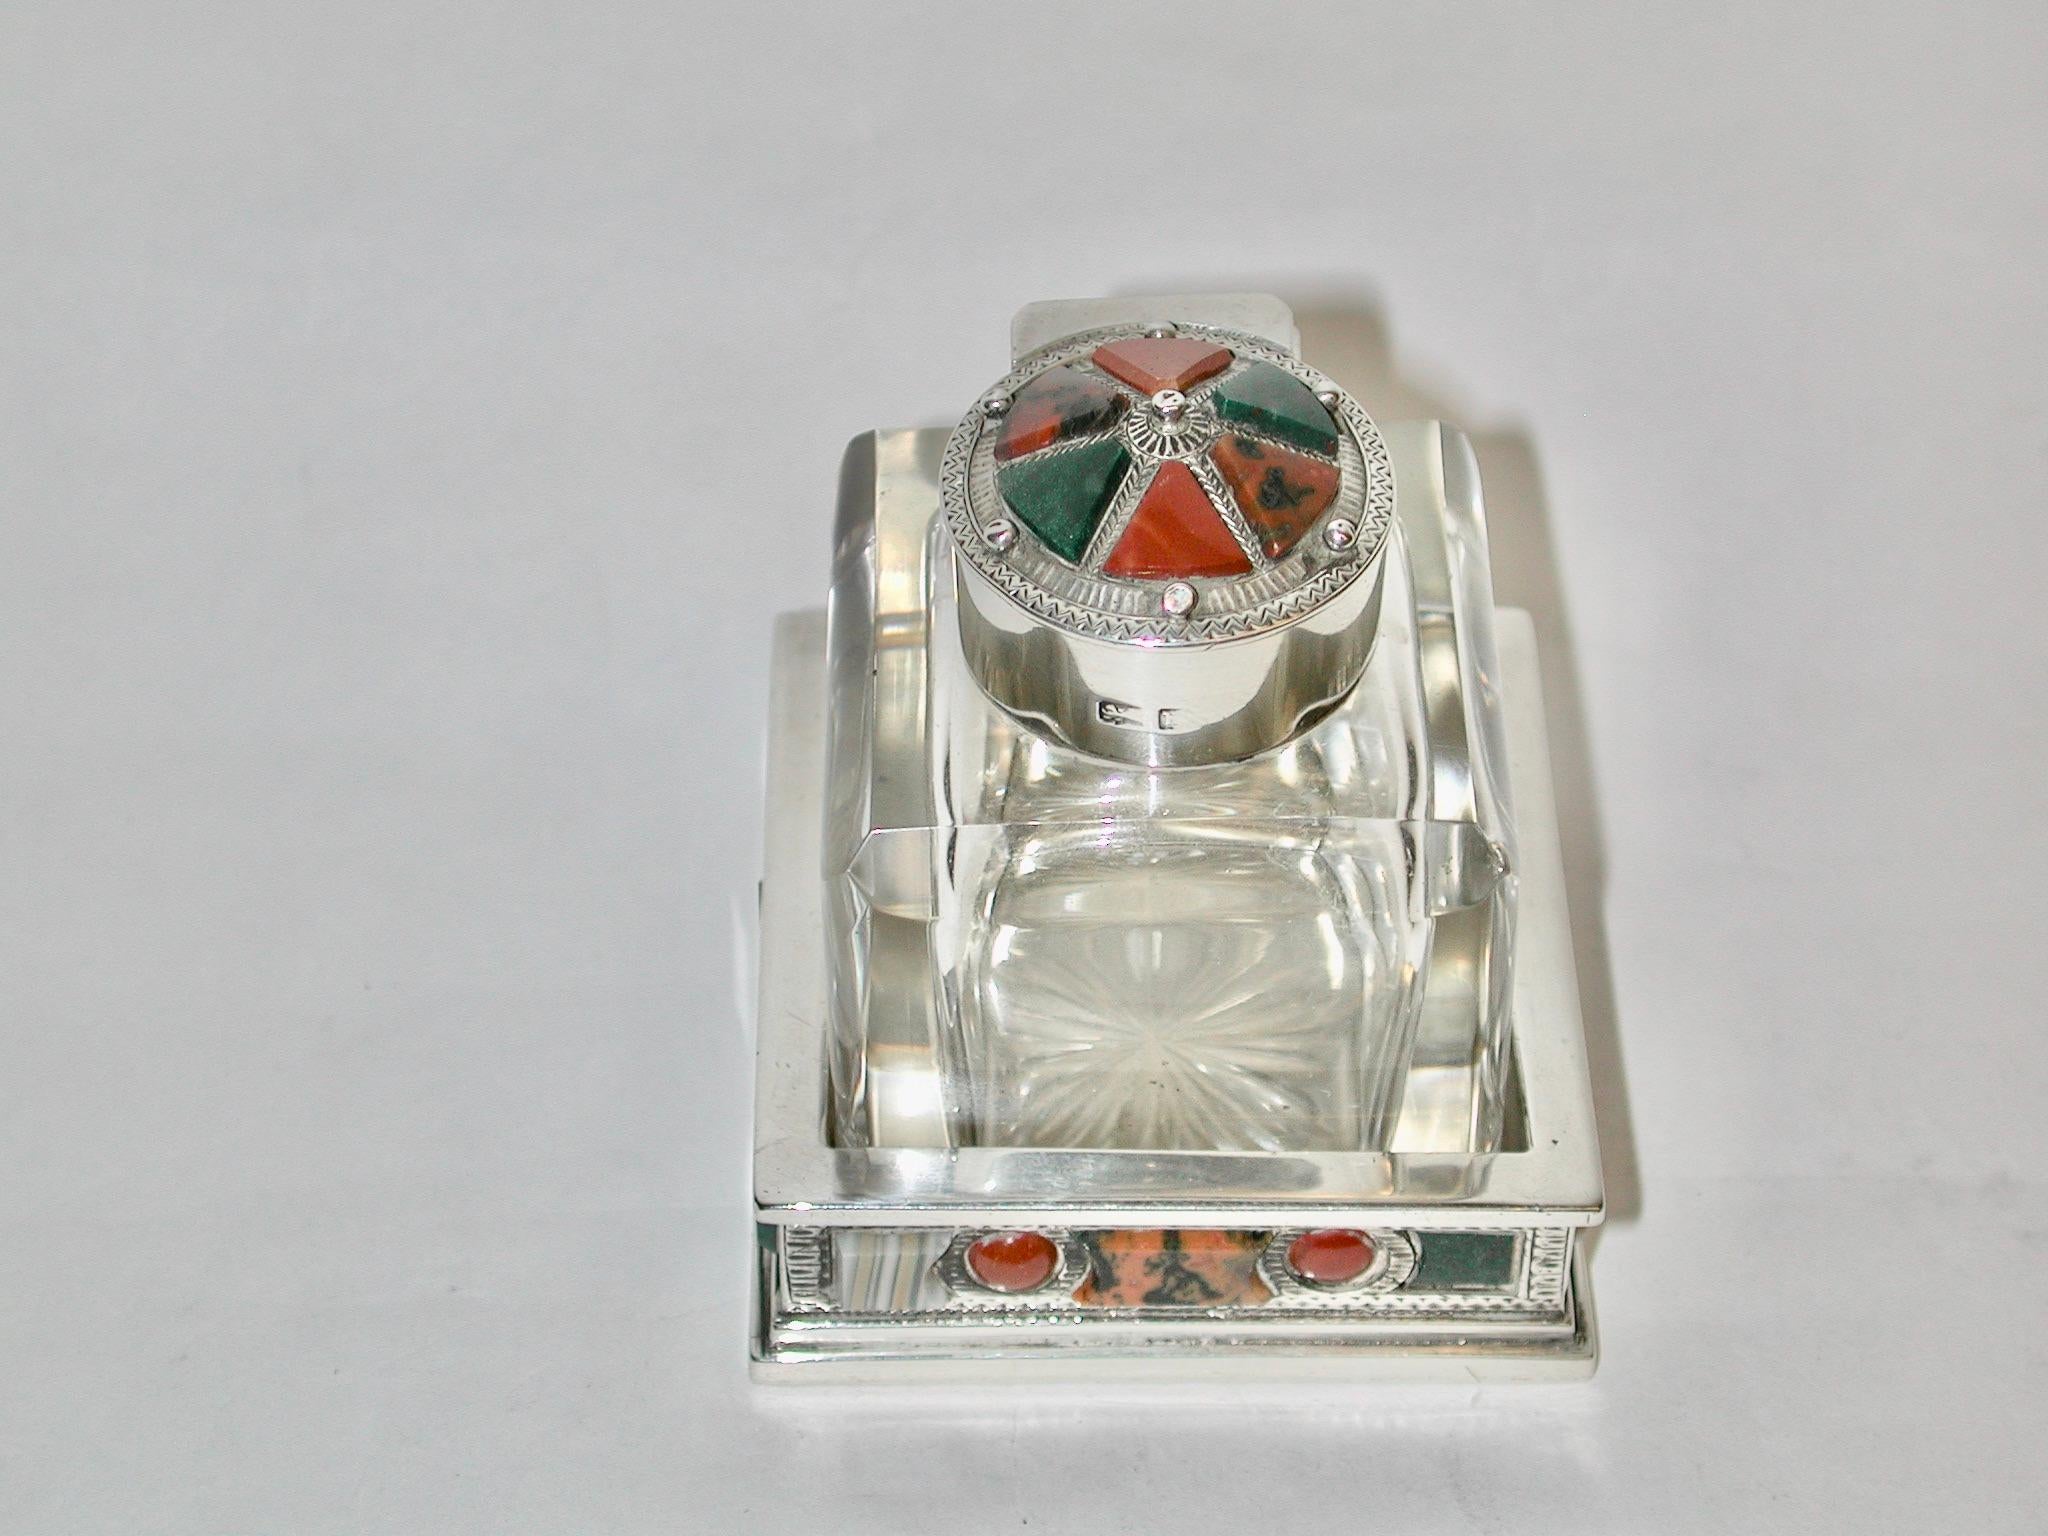 Silver and Glass Scotch Pebble Inkpot dated 1902 James Fenton Birmingham
The relief of the scotch pebble is quite pronouced and is on every side of 
the square base as well as the lid
The Silversmith has made use of banded